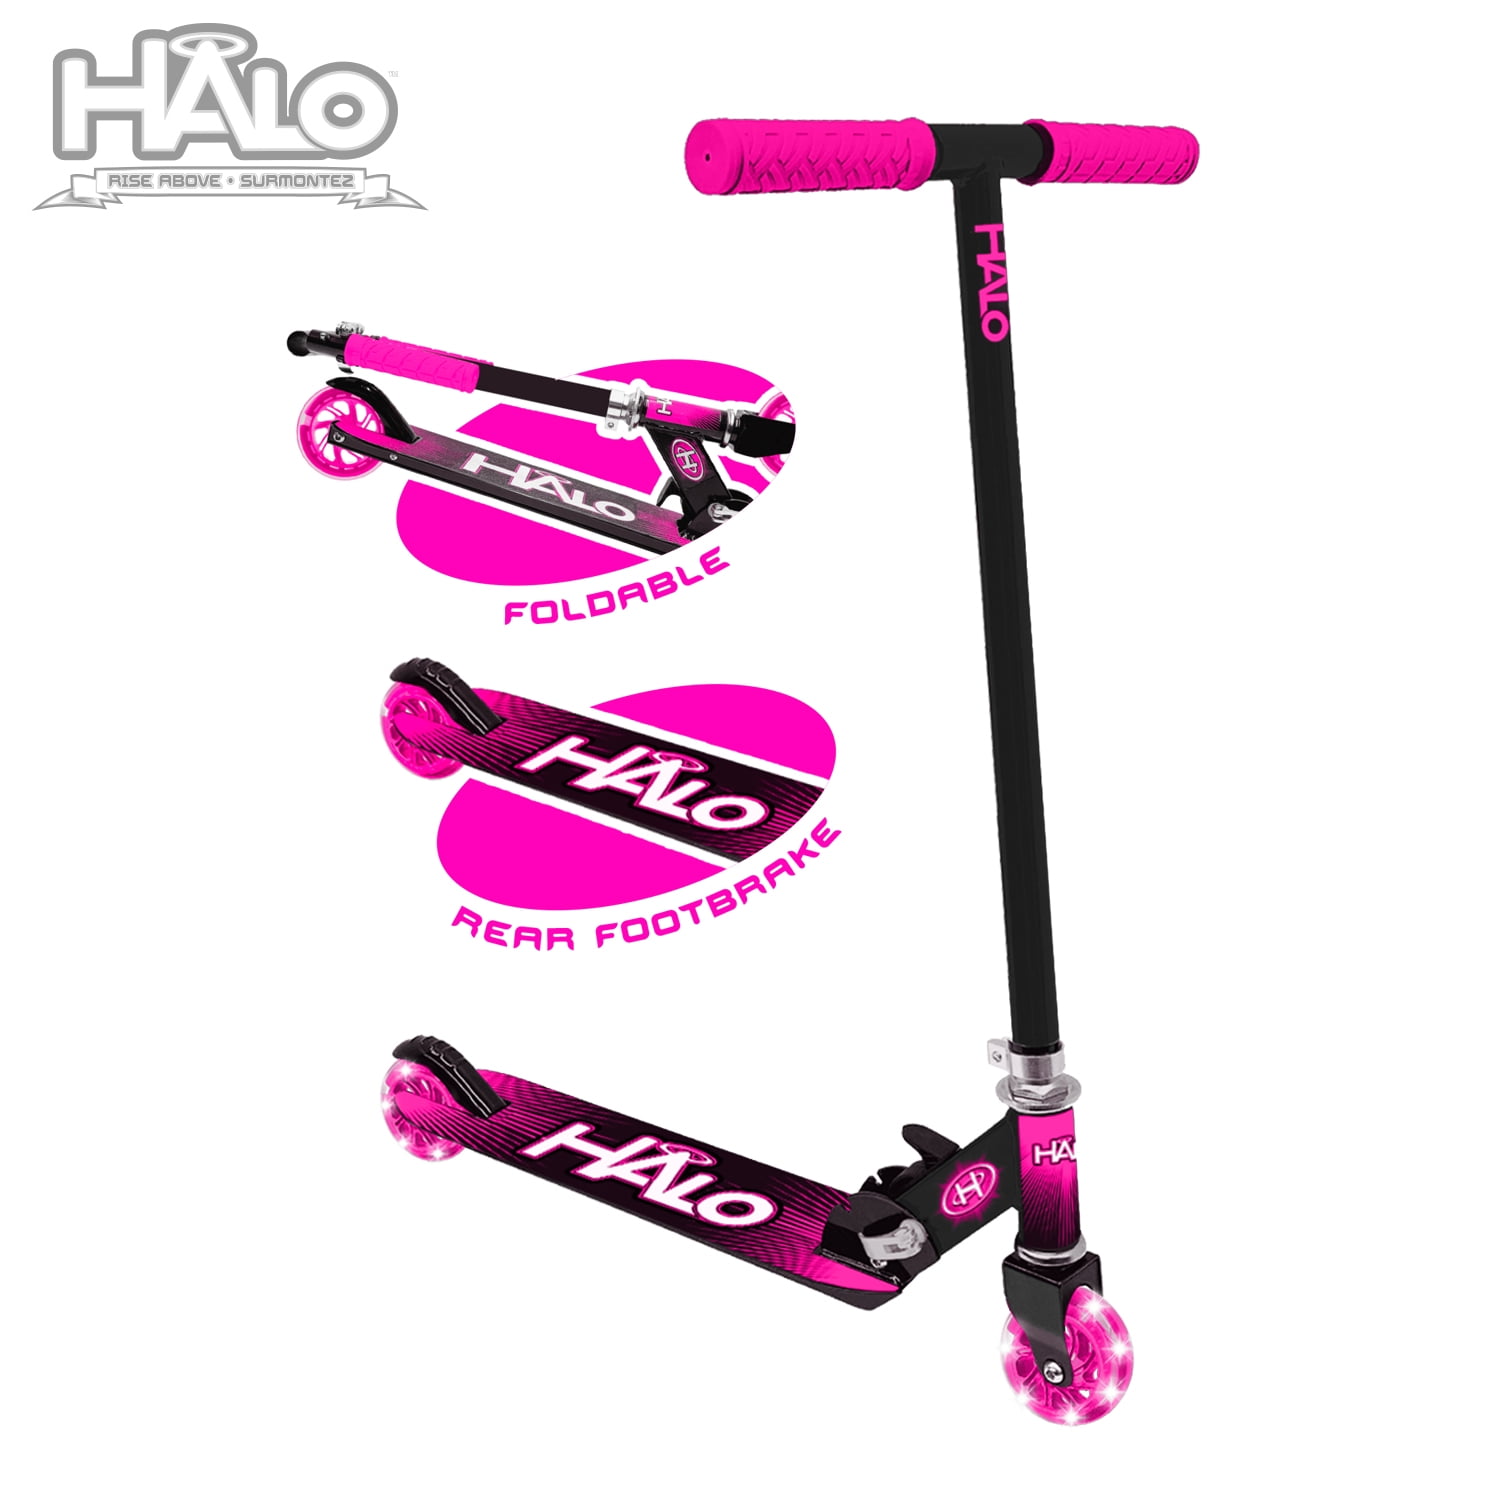 HALO Rise Above Supreme Inline - Green & Black - for All Riders (Unisex) - Walmart.com